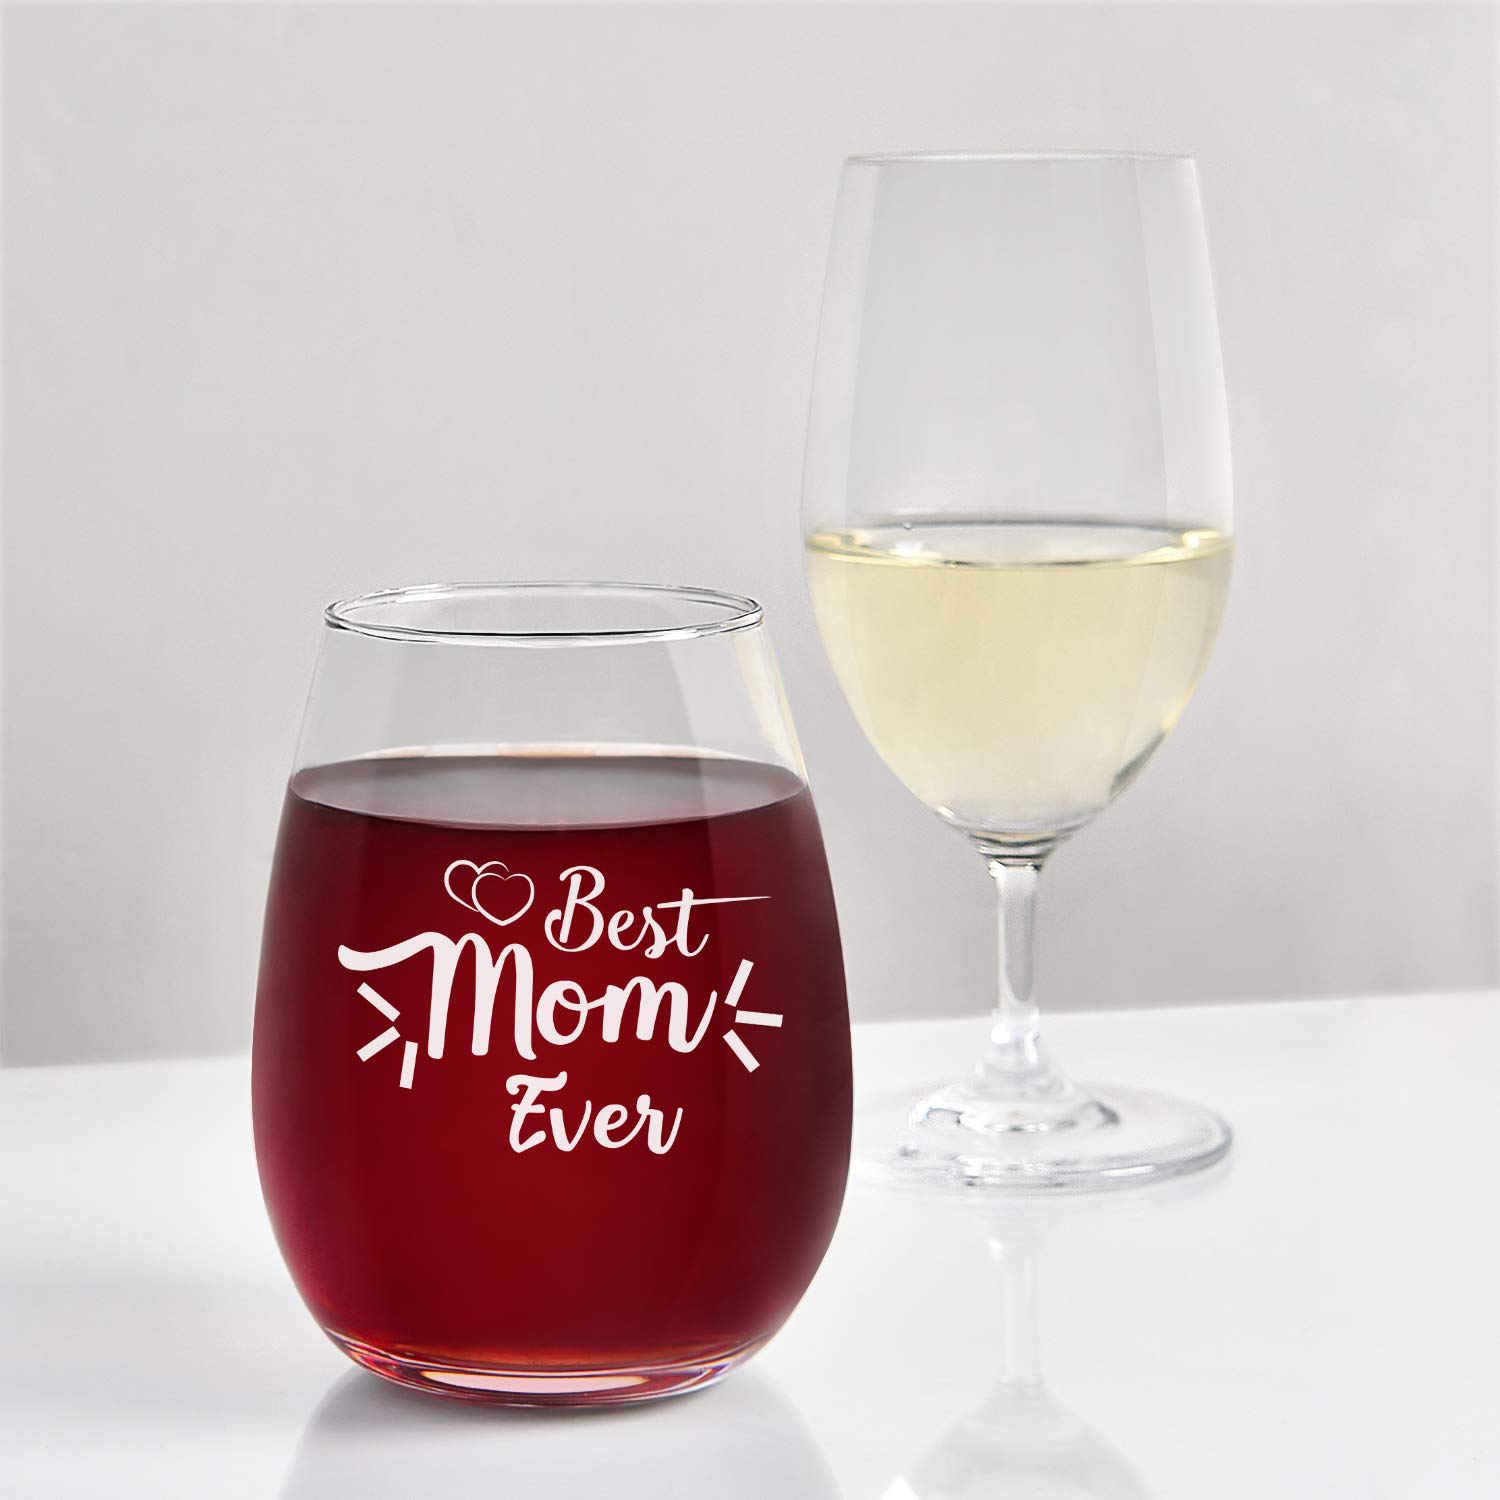 Mother's Day Gift - Best Mom Ever Stemless Wine Glass, Mom Wine Glass 15Oz - Birthday Gift, Mother's Day Gift for Women Mom Mother Wife from Daughter Son Husband